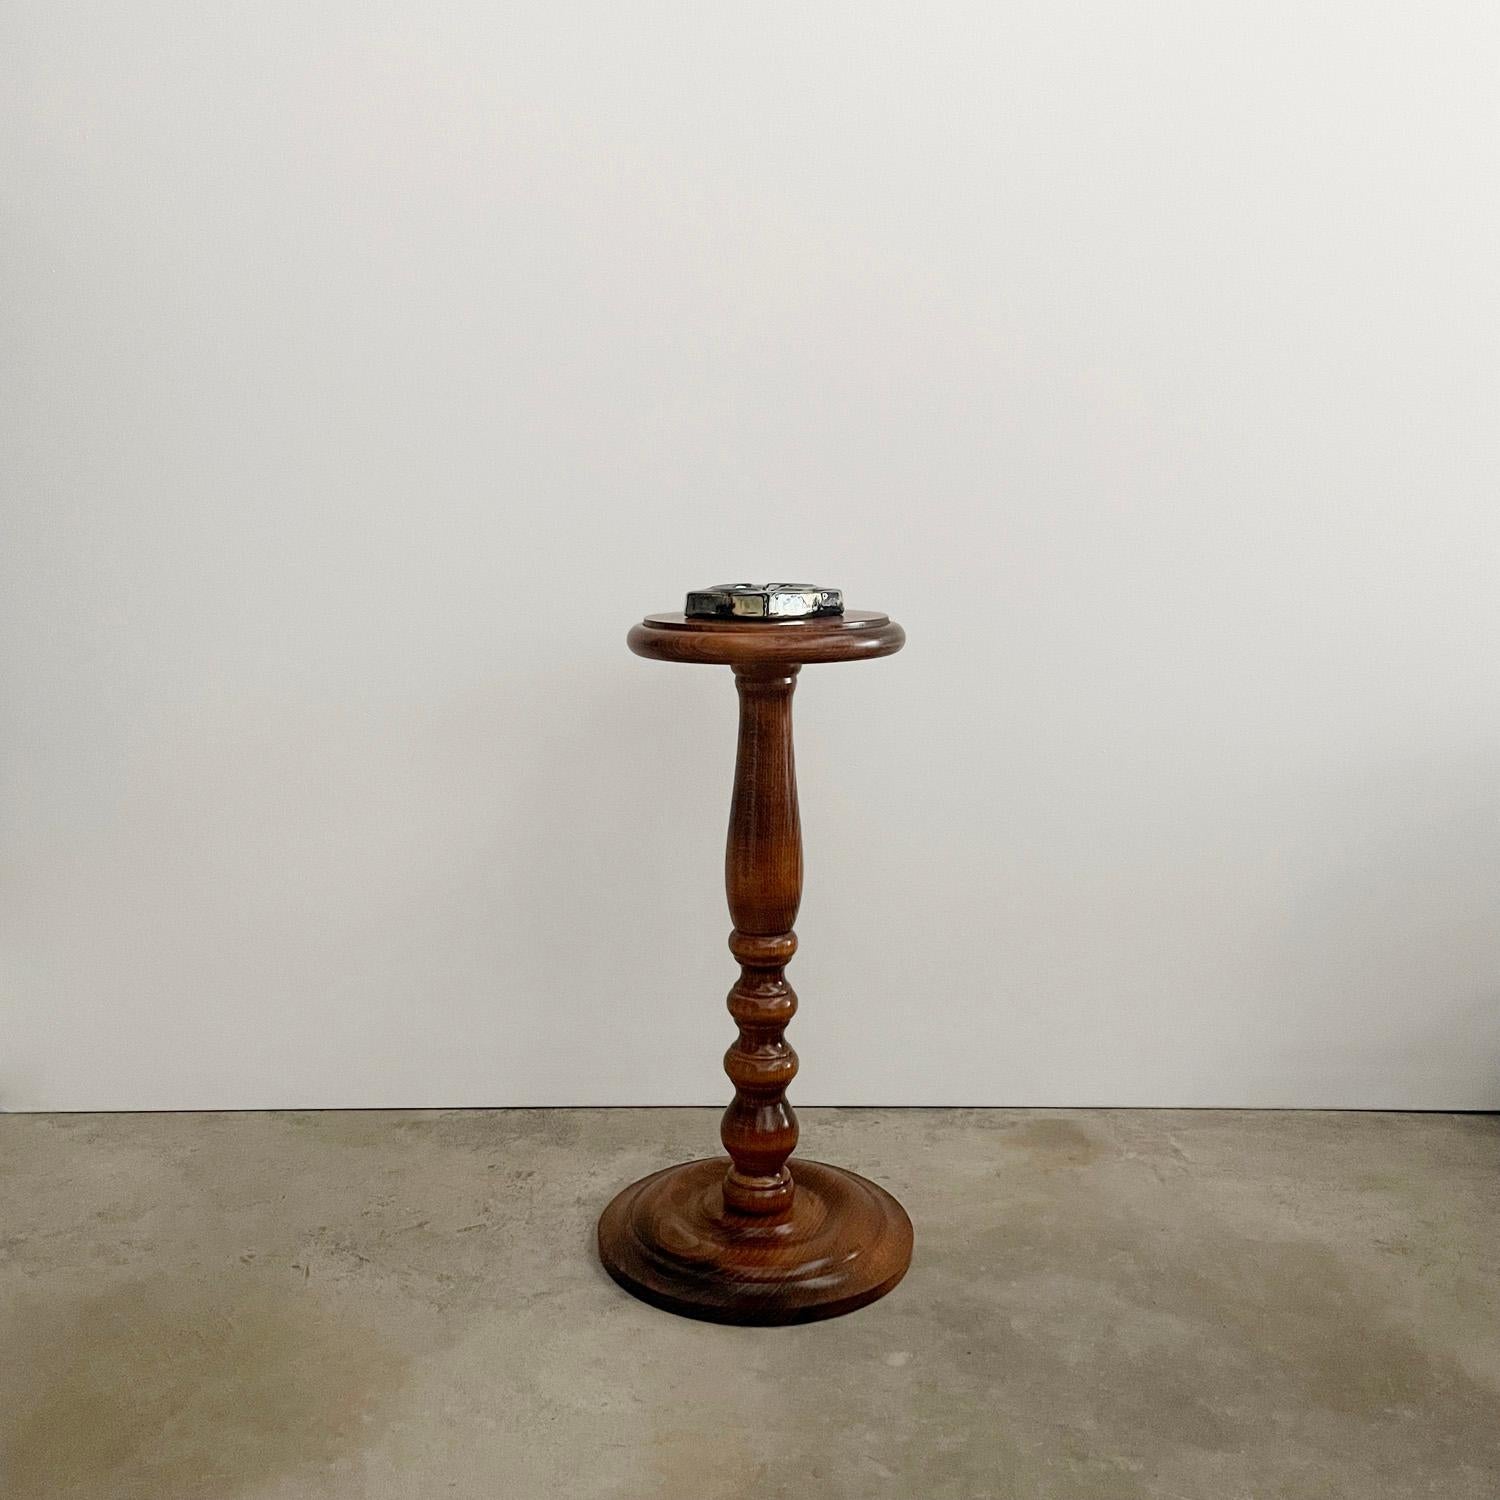 French sculpted wood cocktail table
France, mid century
Hand crafted solid wood artisanal piece
Double stacked tabletop which sits on a platform with rounded edges
Beautifully sculpted turned wood pedestal
Circular base with rounded grooves
Lovely